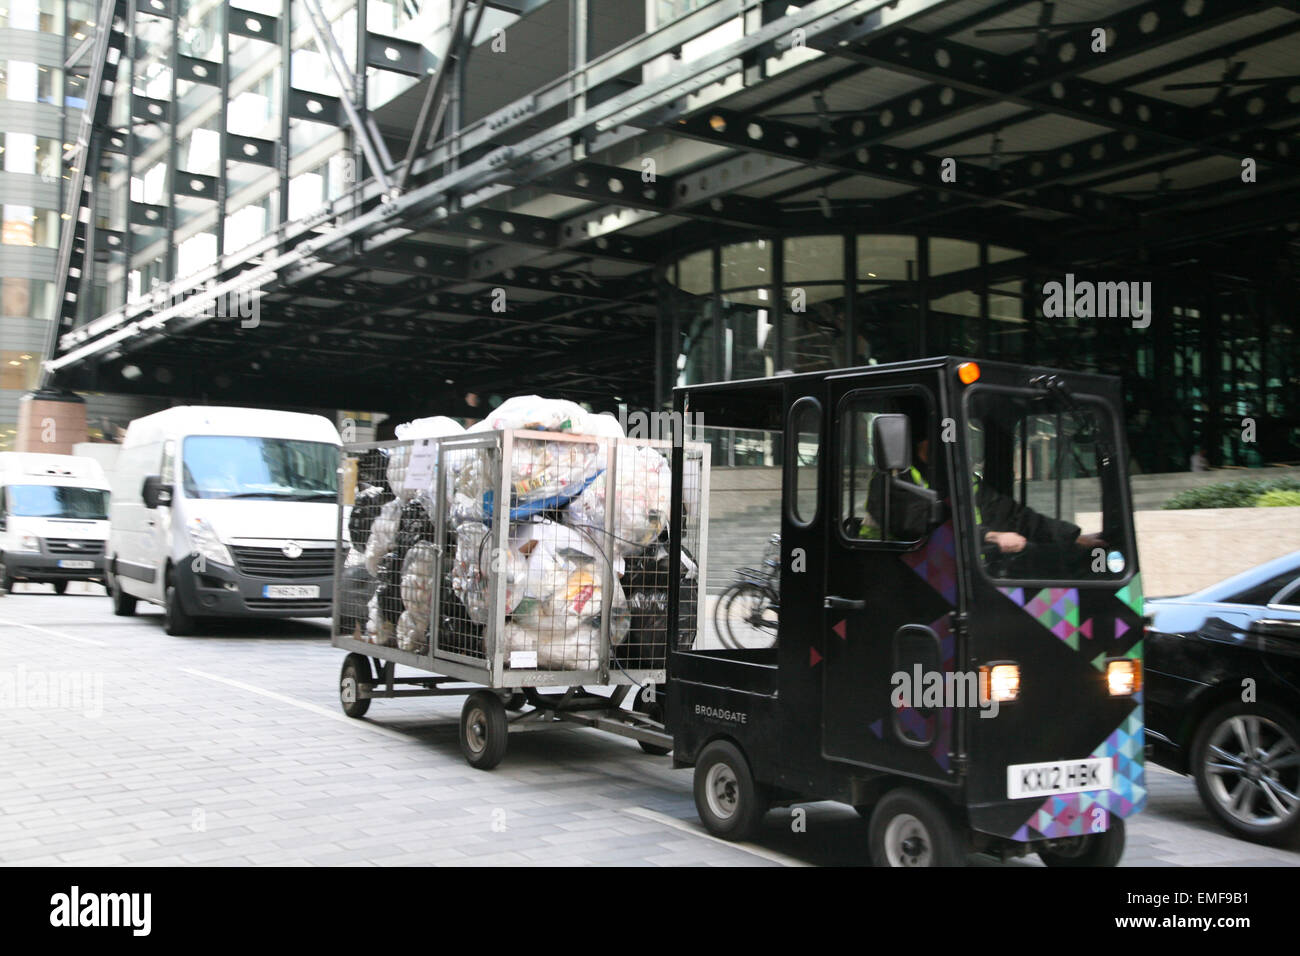 Rubbish collection vehicle at the Broadgate Tower, City of London, England. Stock Photo